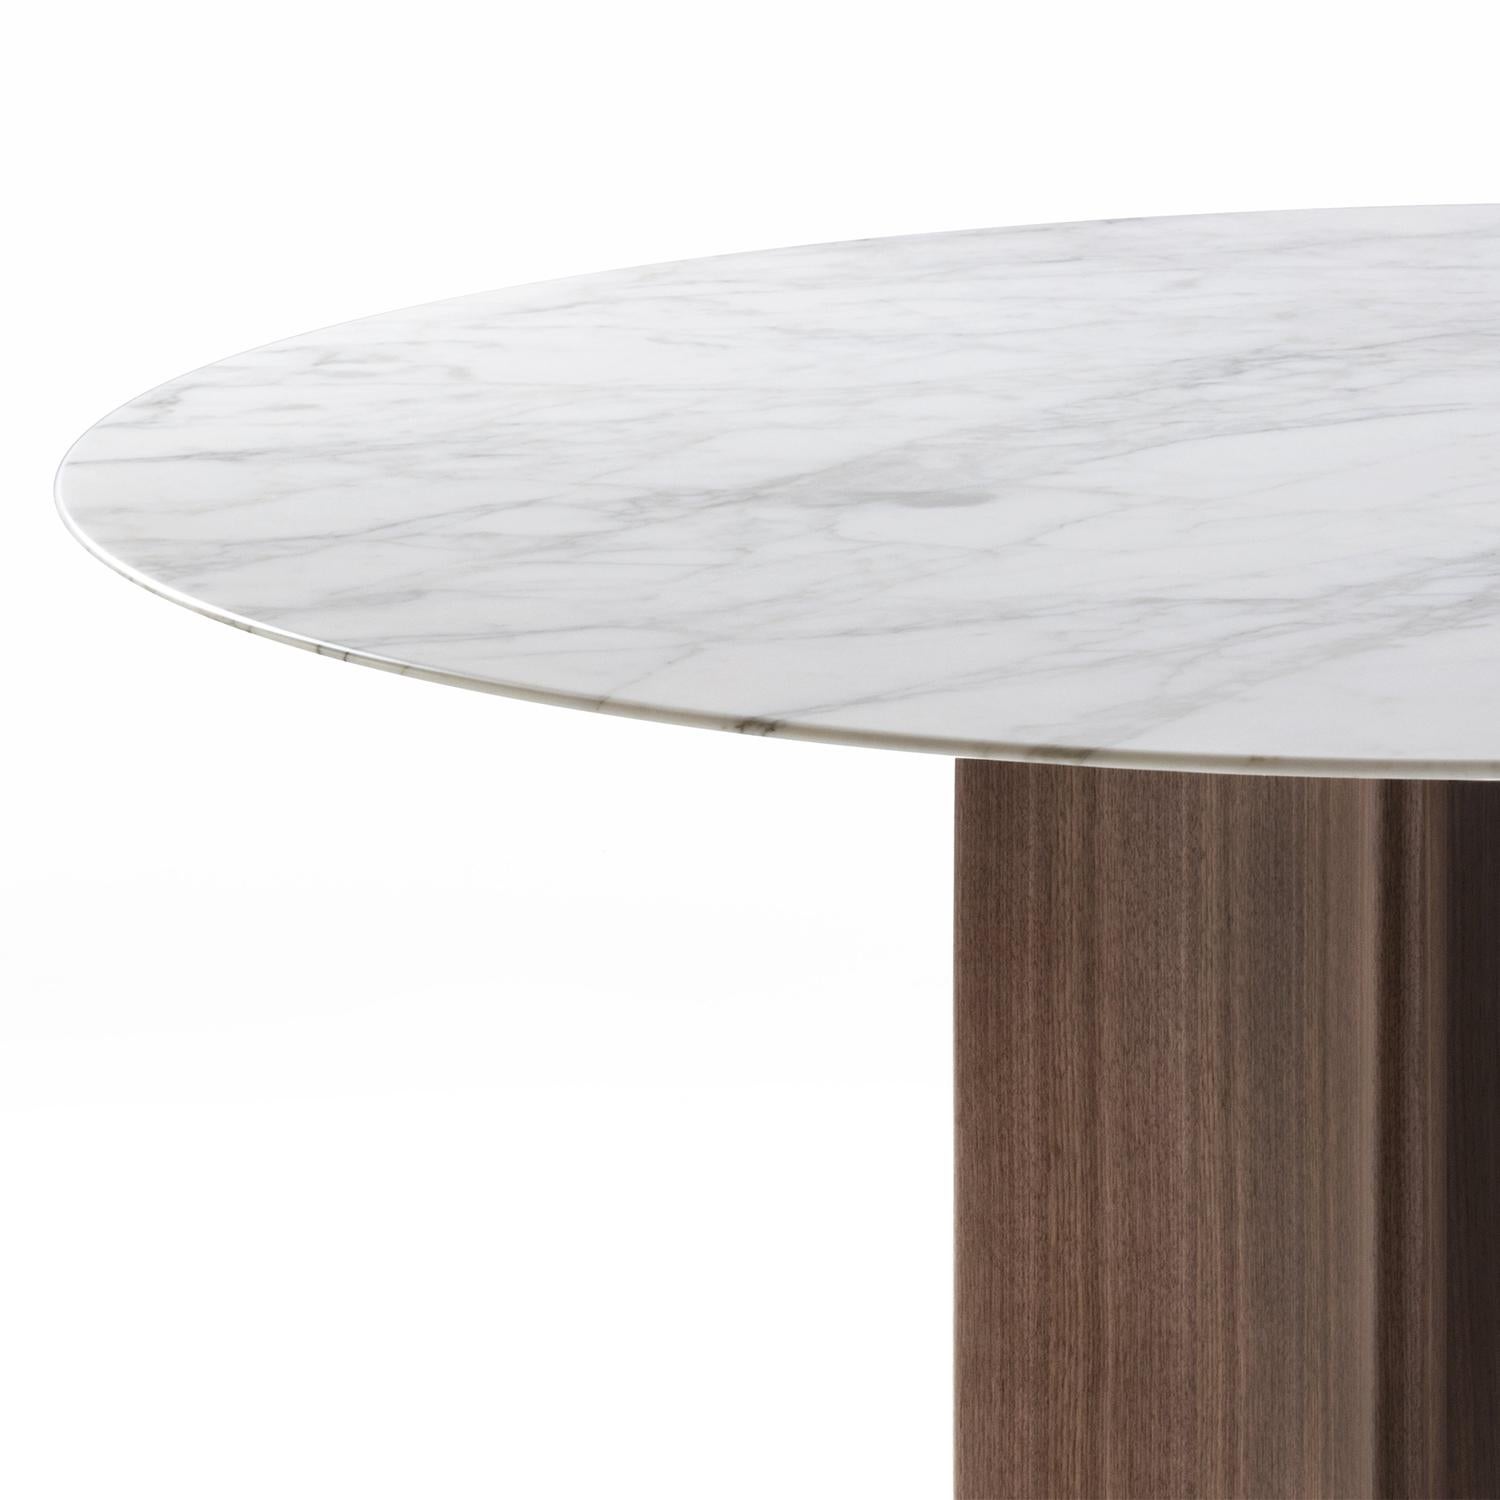 Dining Table Ornament White Marble with white calacatta marble 
top and with solid walnut wood base composed of 3 equidistant 
curved solid walnut wood feet with black chromed end feet.